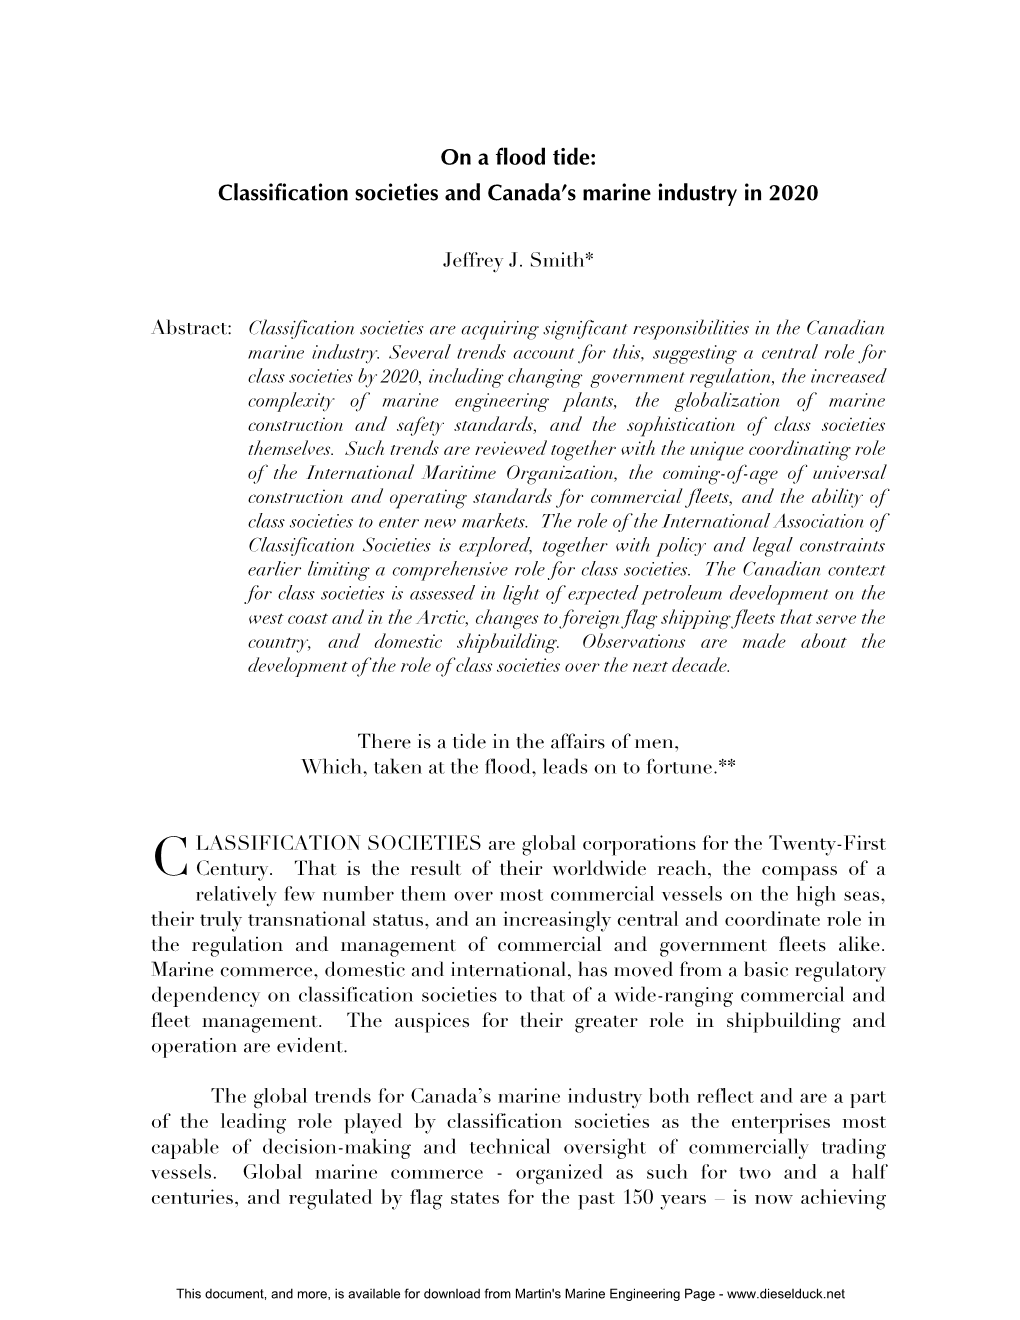 On a Flood Tide: Classification Societies and Canada's Marine Industry In